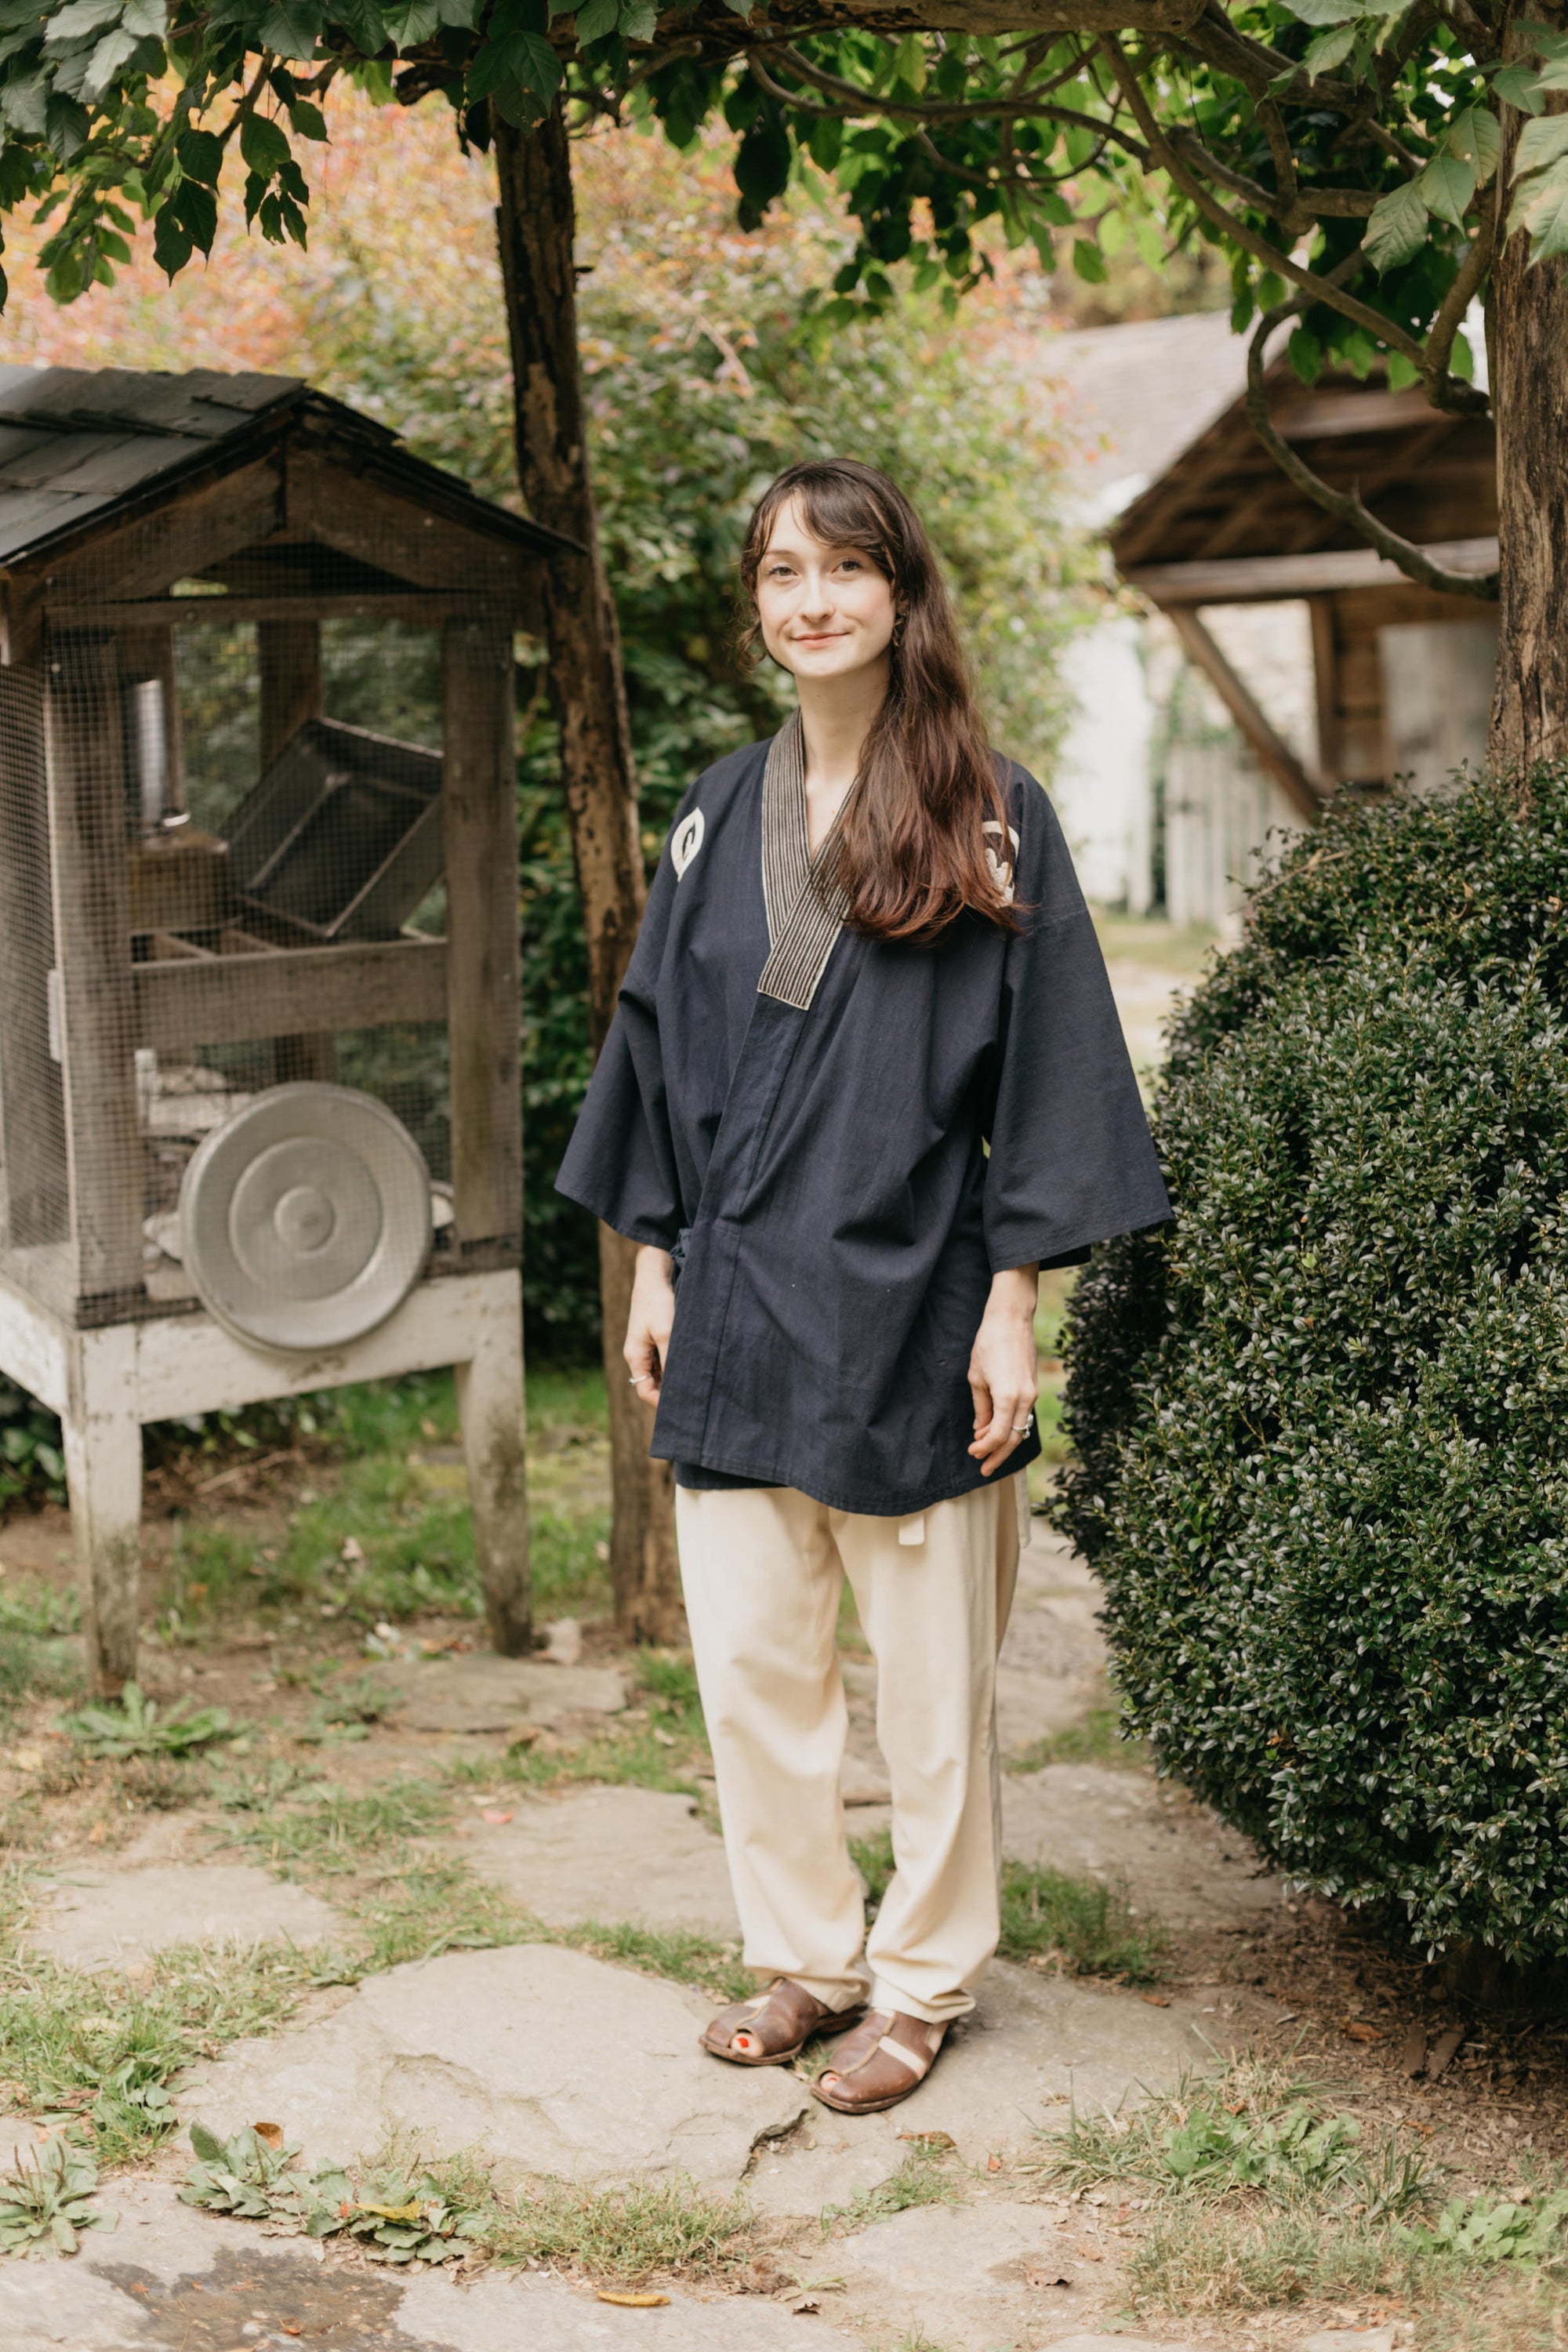 Japanese American woman in a navy Hippari and cream pants standing by shrubs outside.